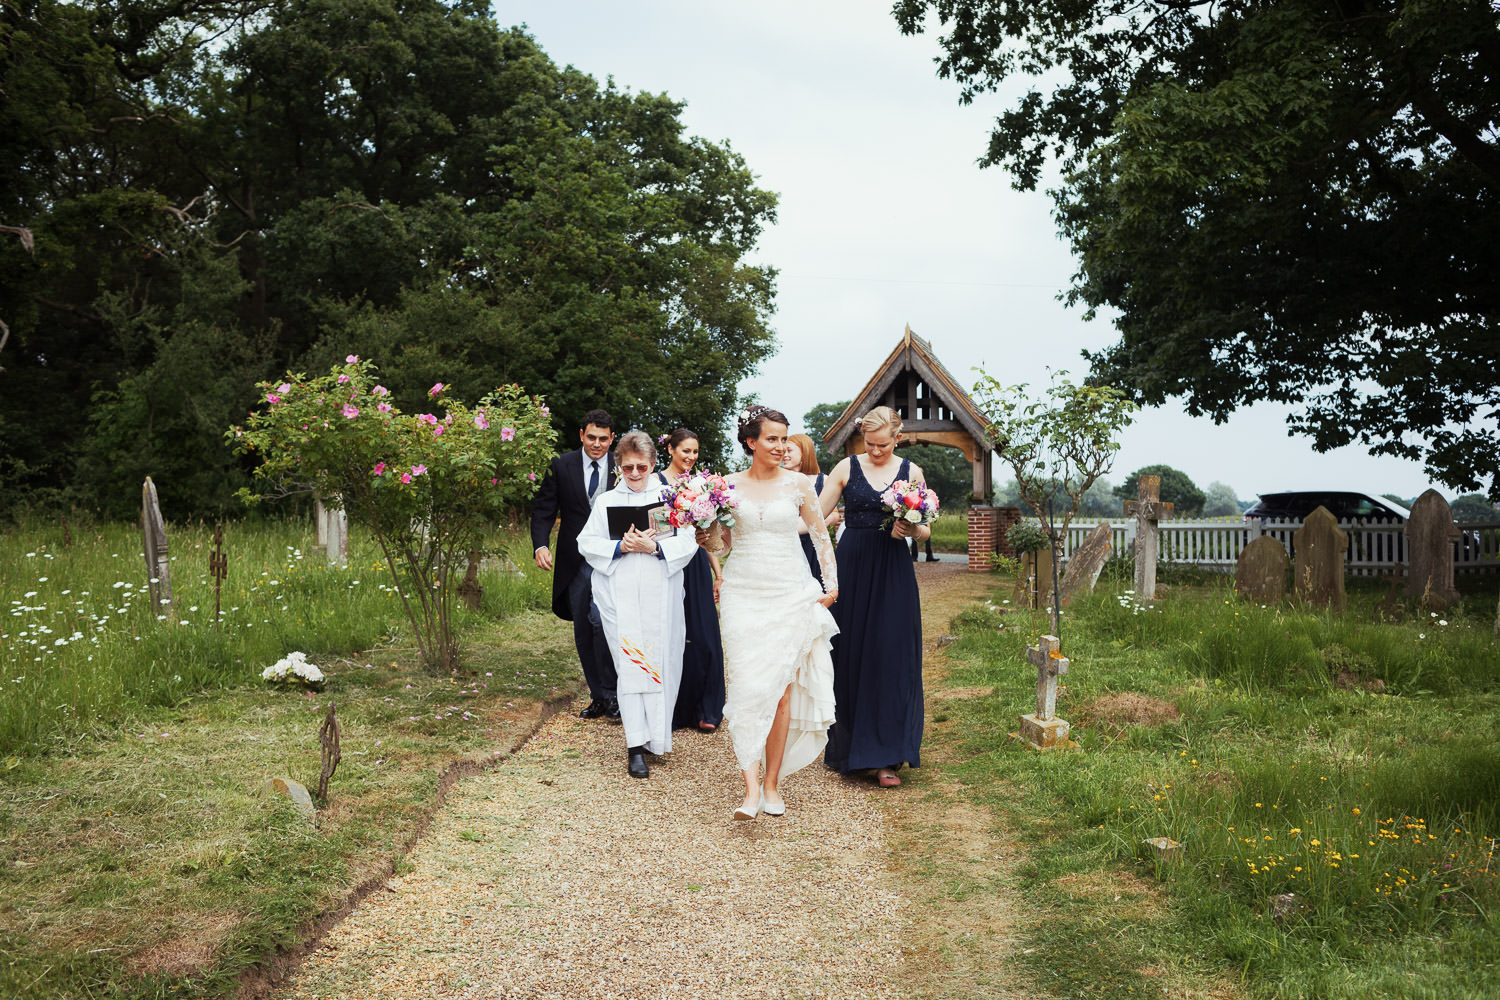 Bride approaching the church in Great Totham with the vicar and bridesmaids.